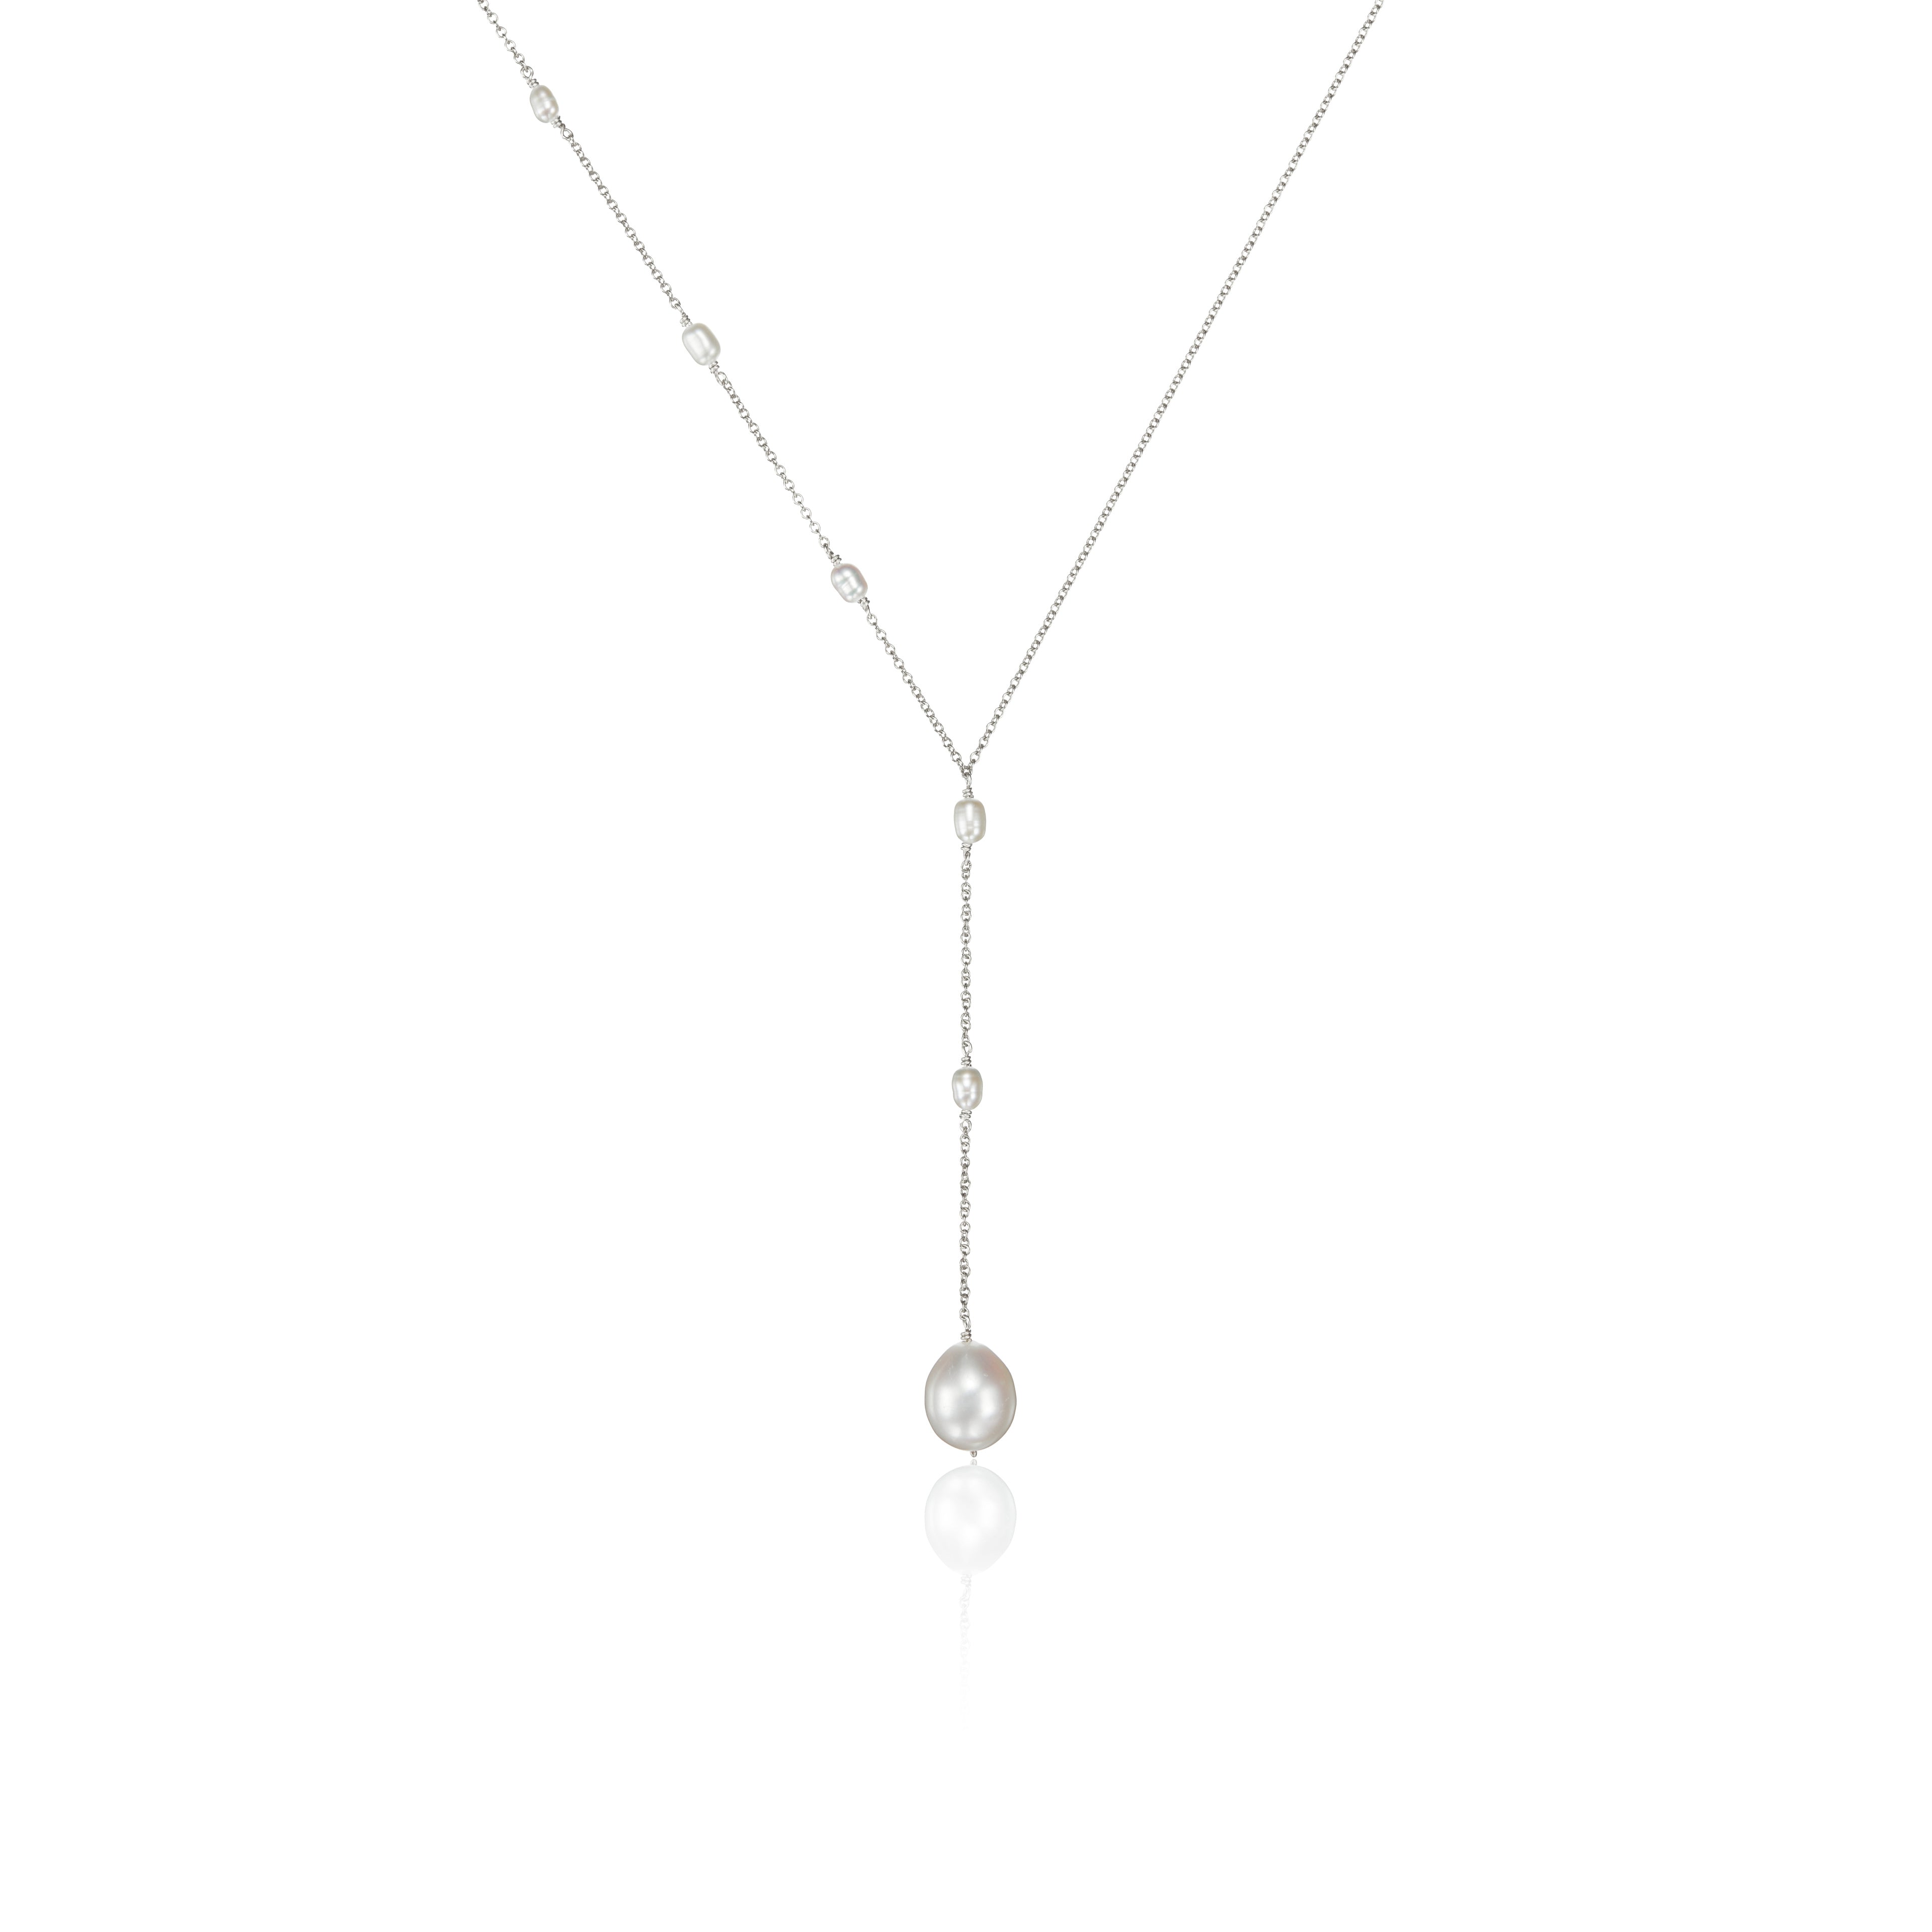 Silver Seed Pearl Lariat Necklace